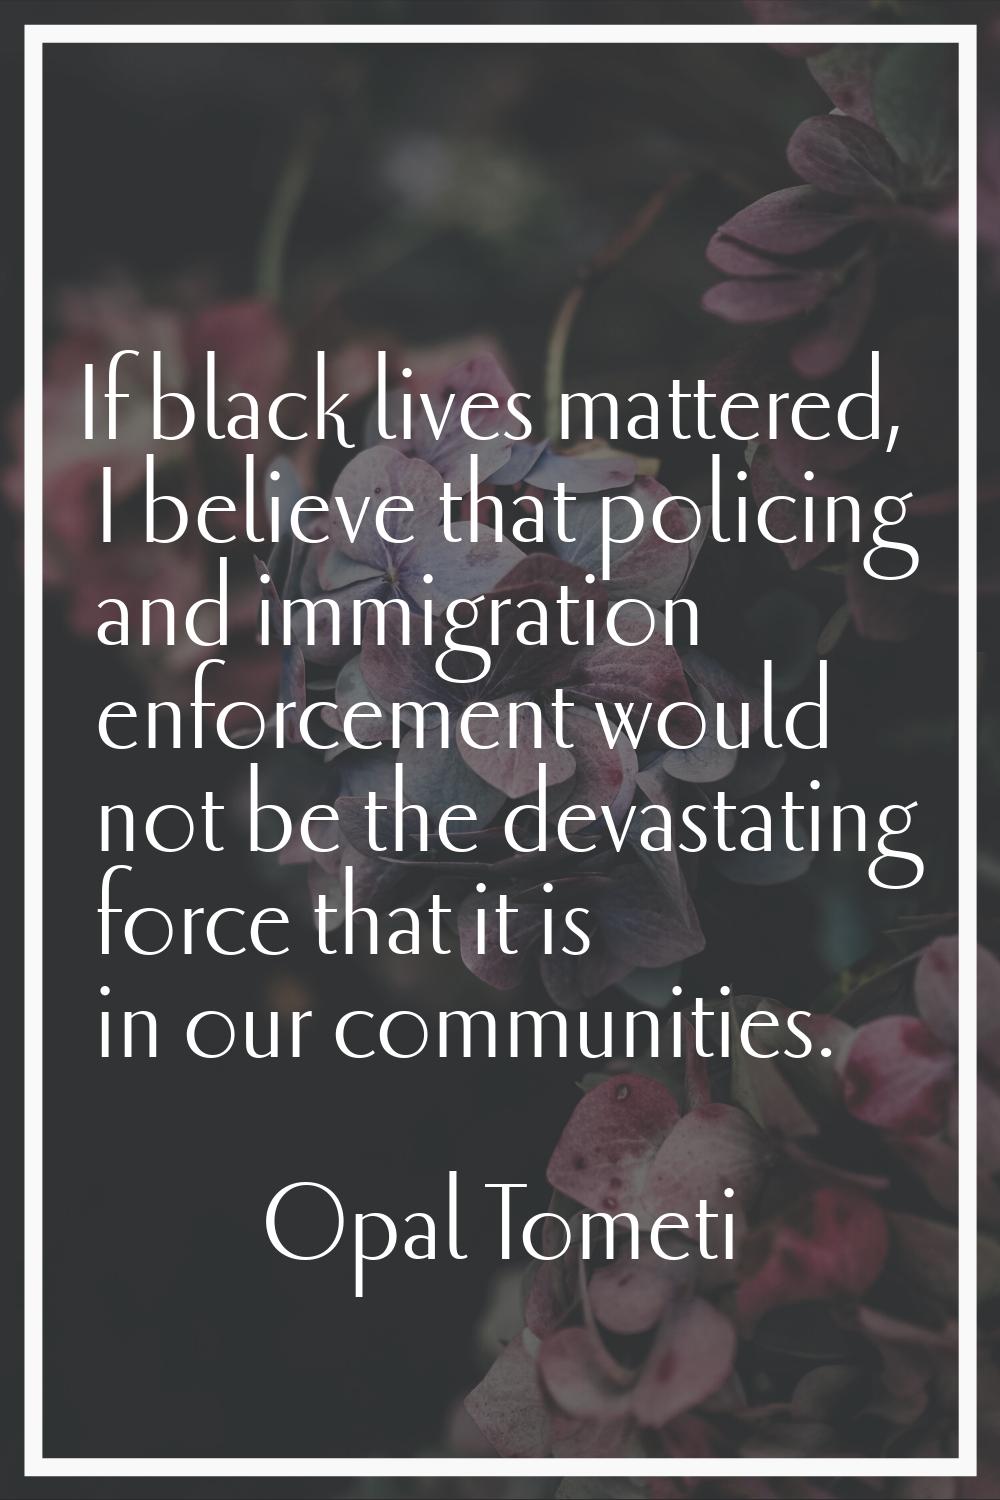 If black lives mattered, I believe that policing and immigration enforcement would not be the devas